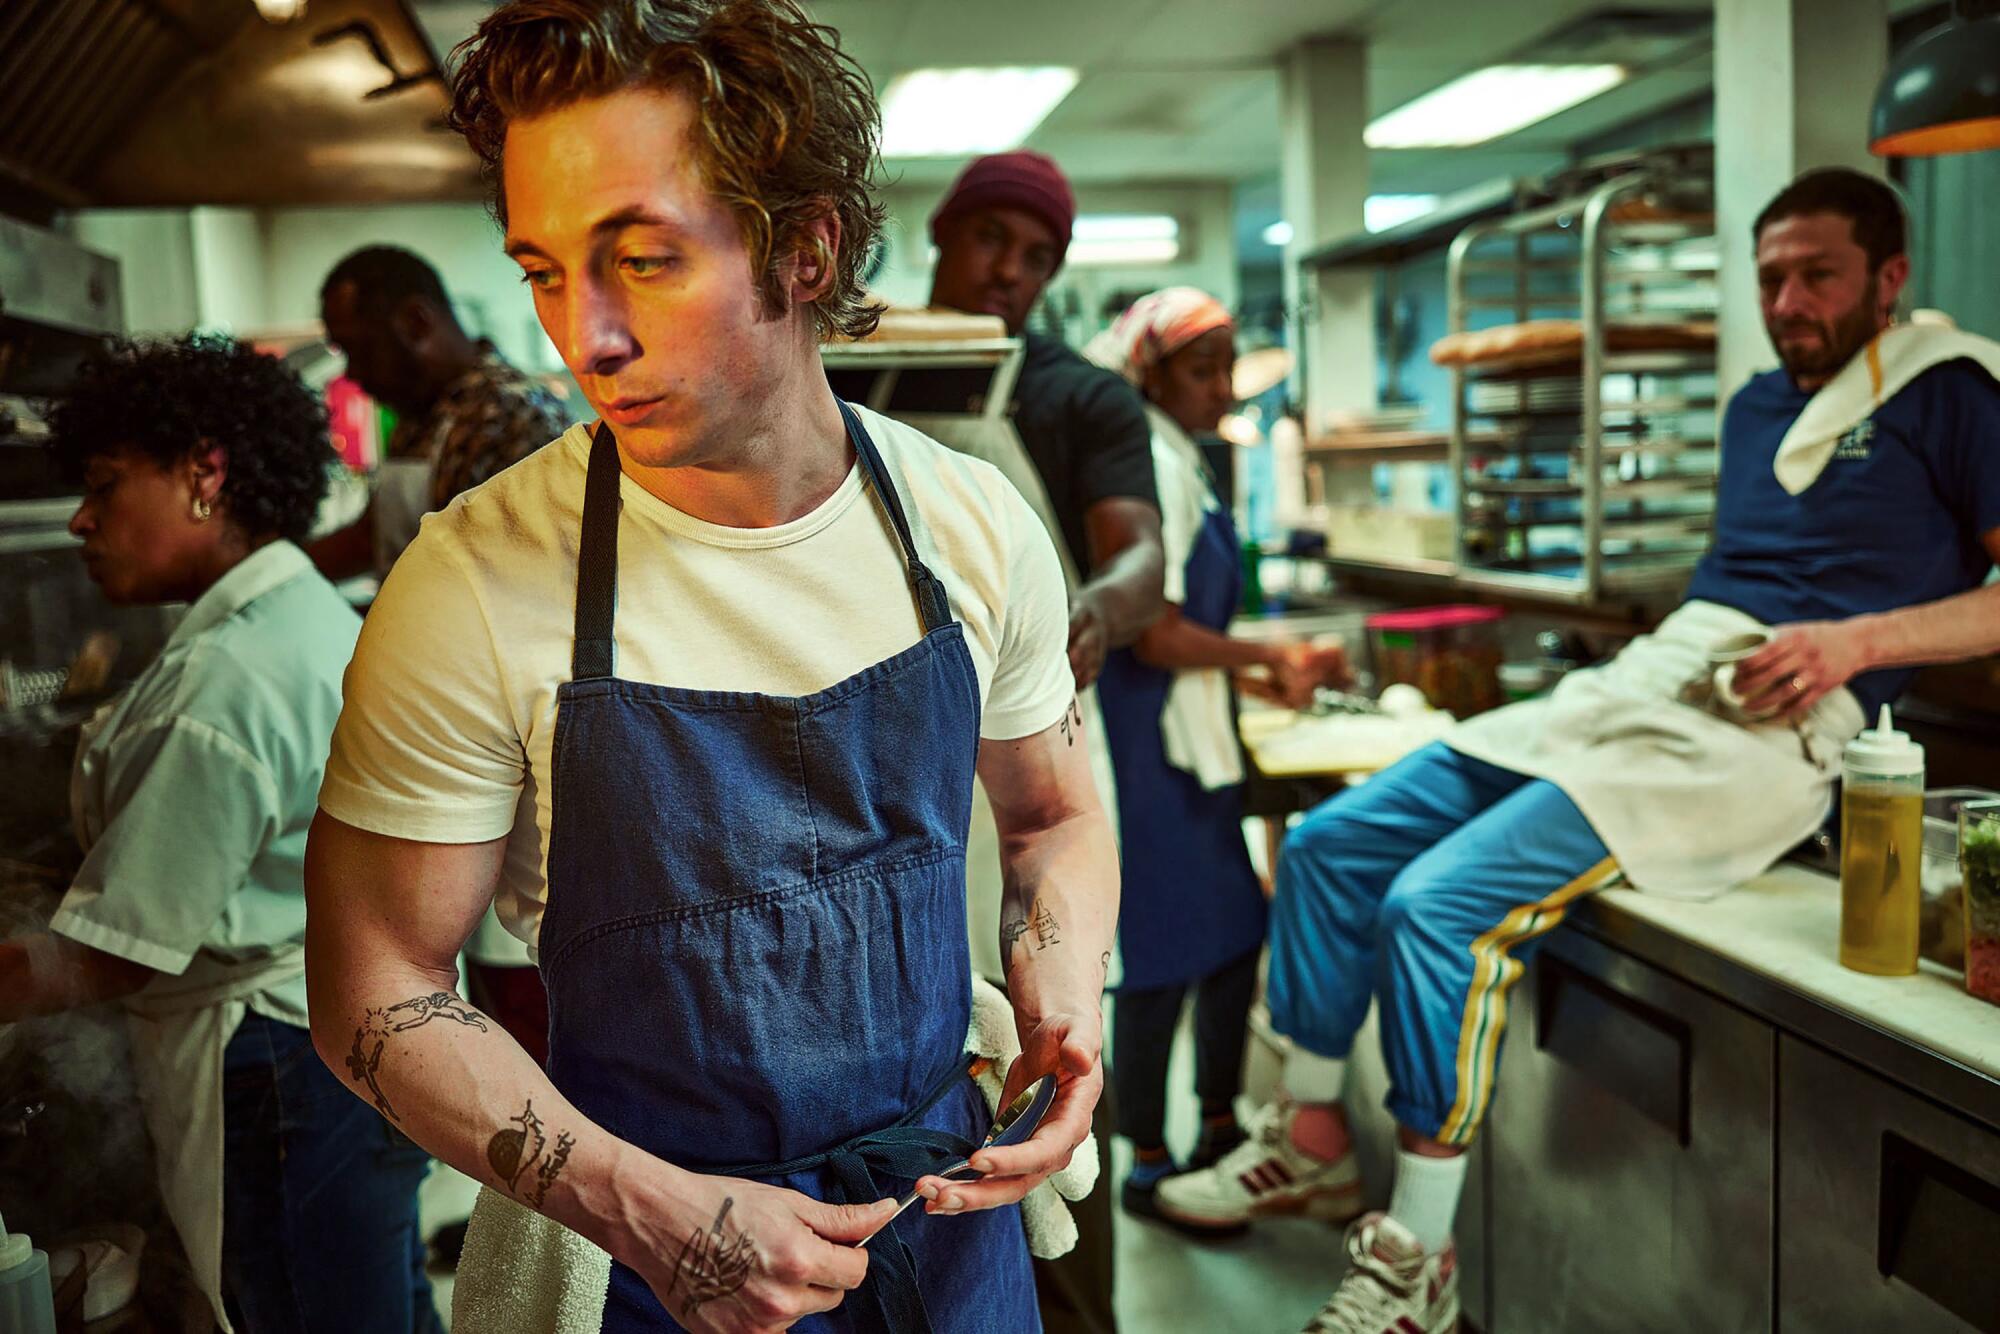 A chef in a white shirt and blue apron stands in a restaurant kitchen looking downward.